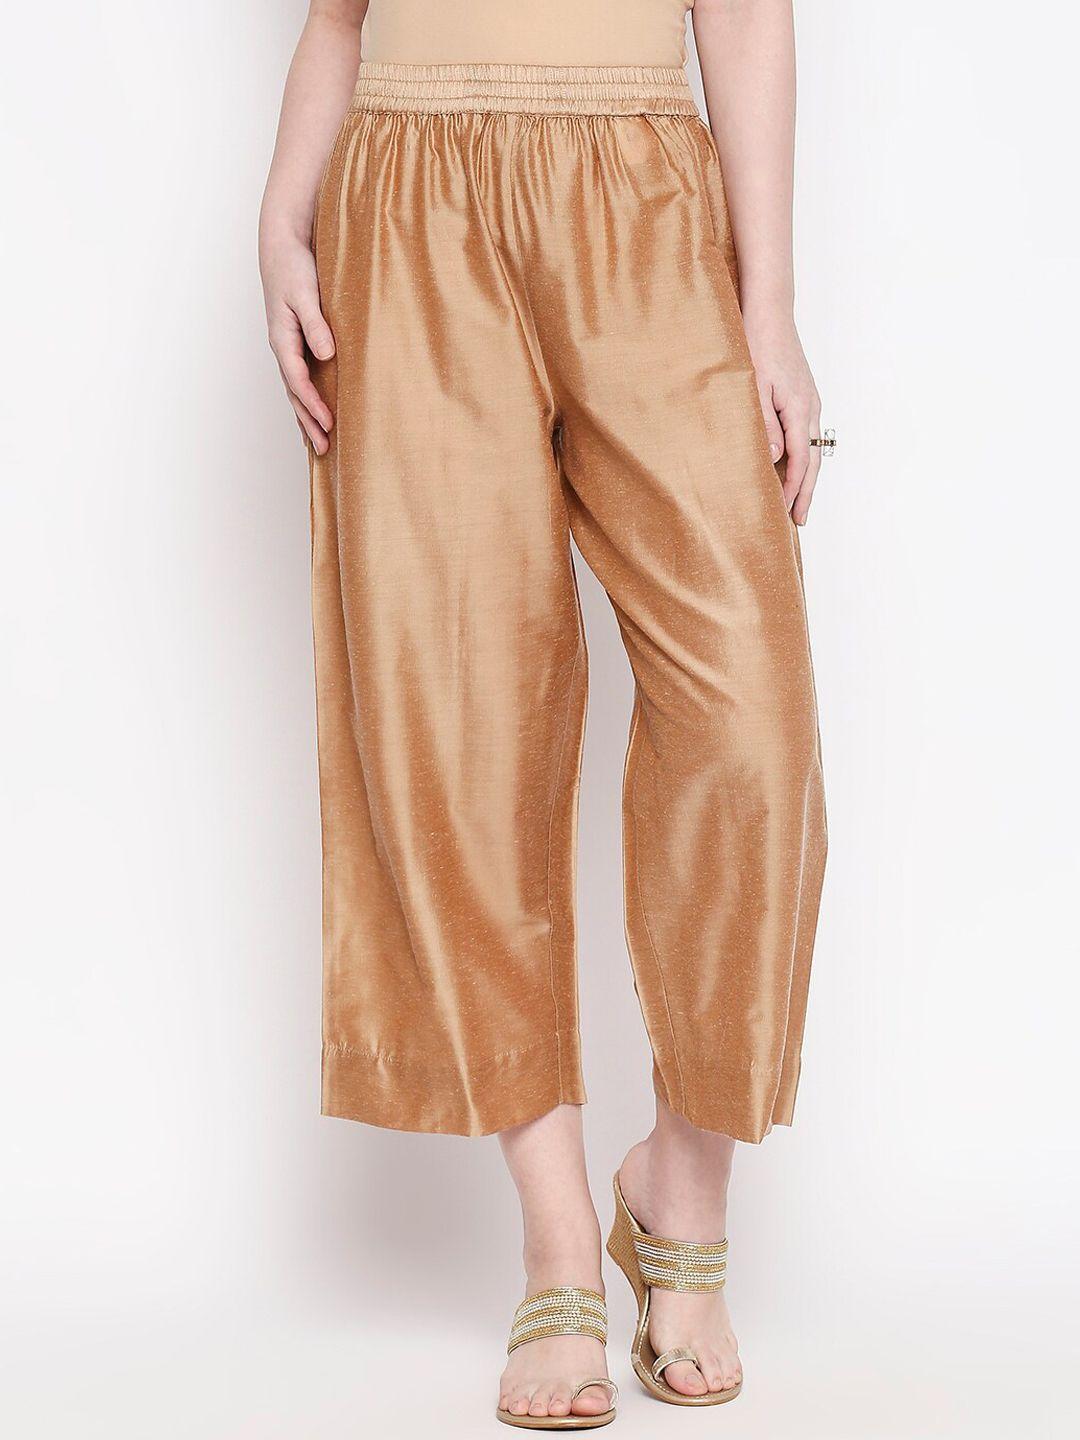 rangmanch by pantaloons women gold-toned regular fit solid culottes